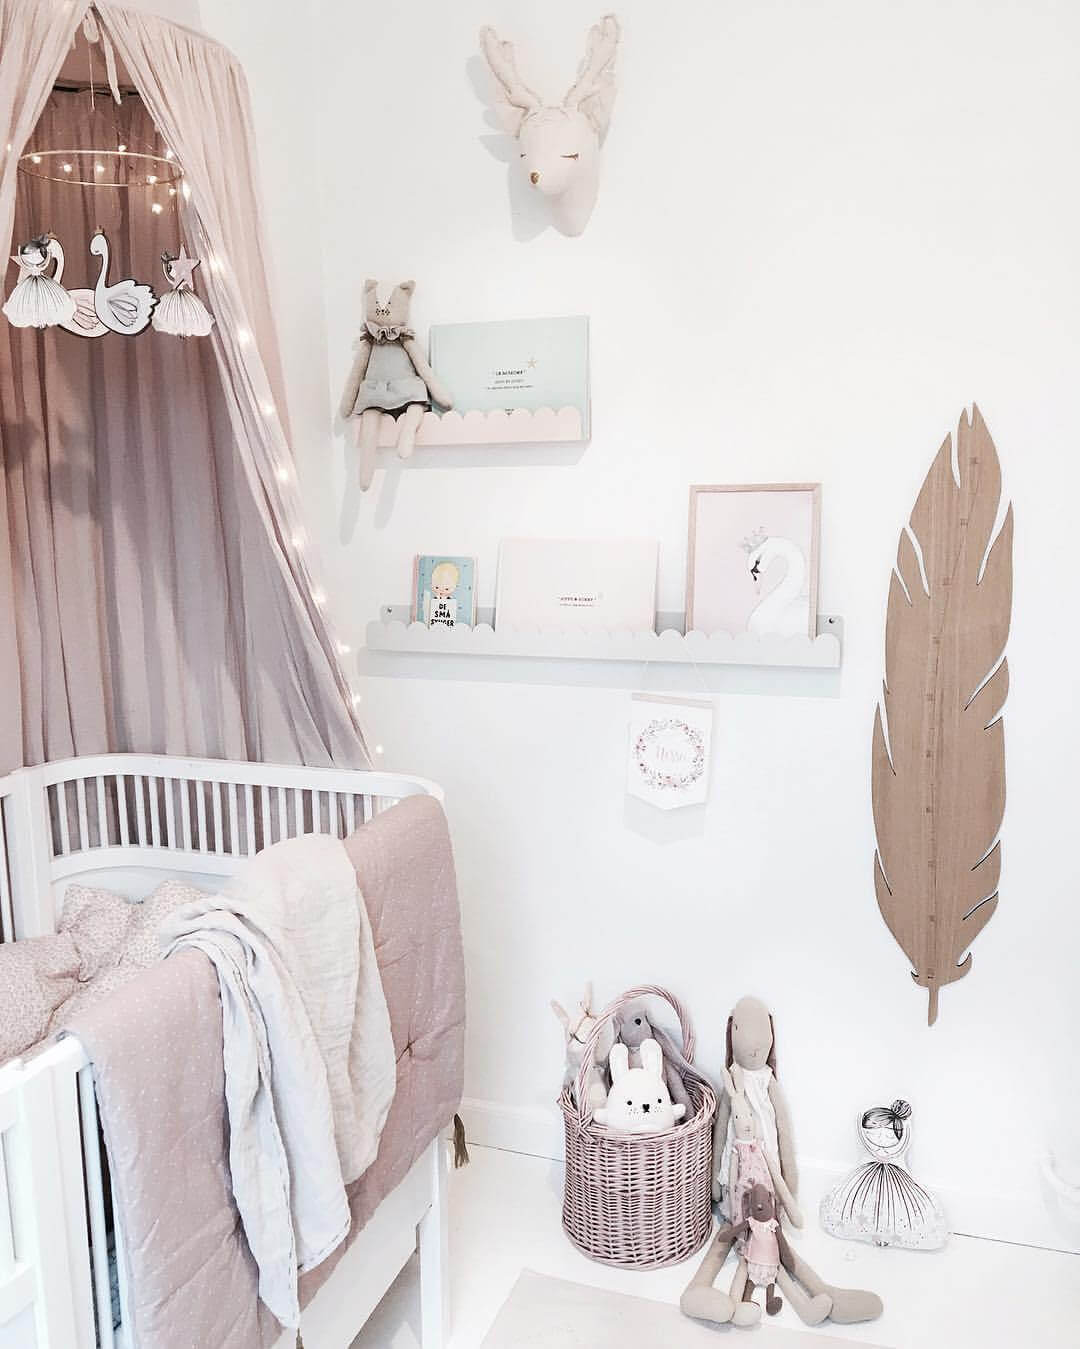 Soft Pinks and Eclectic Art For Nursery Whimsy